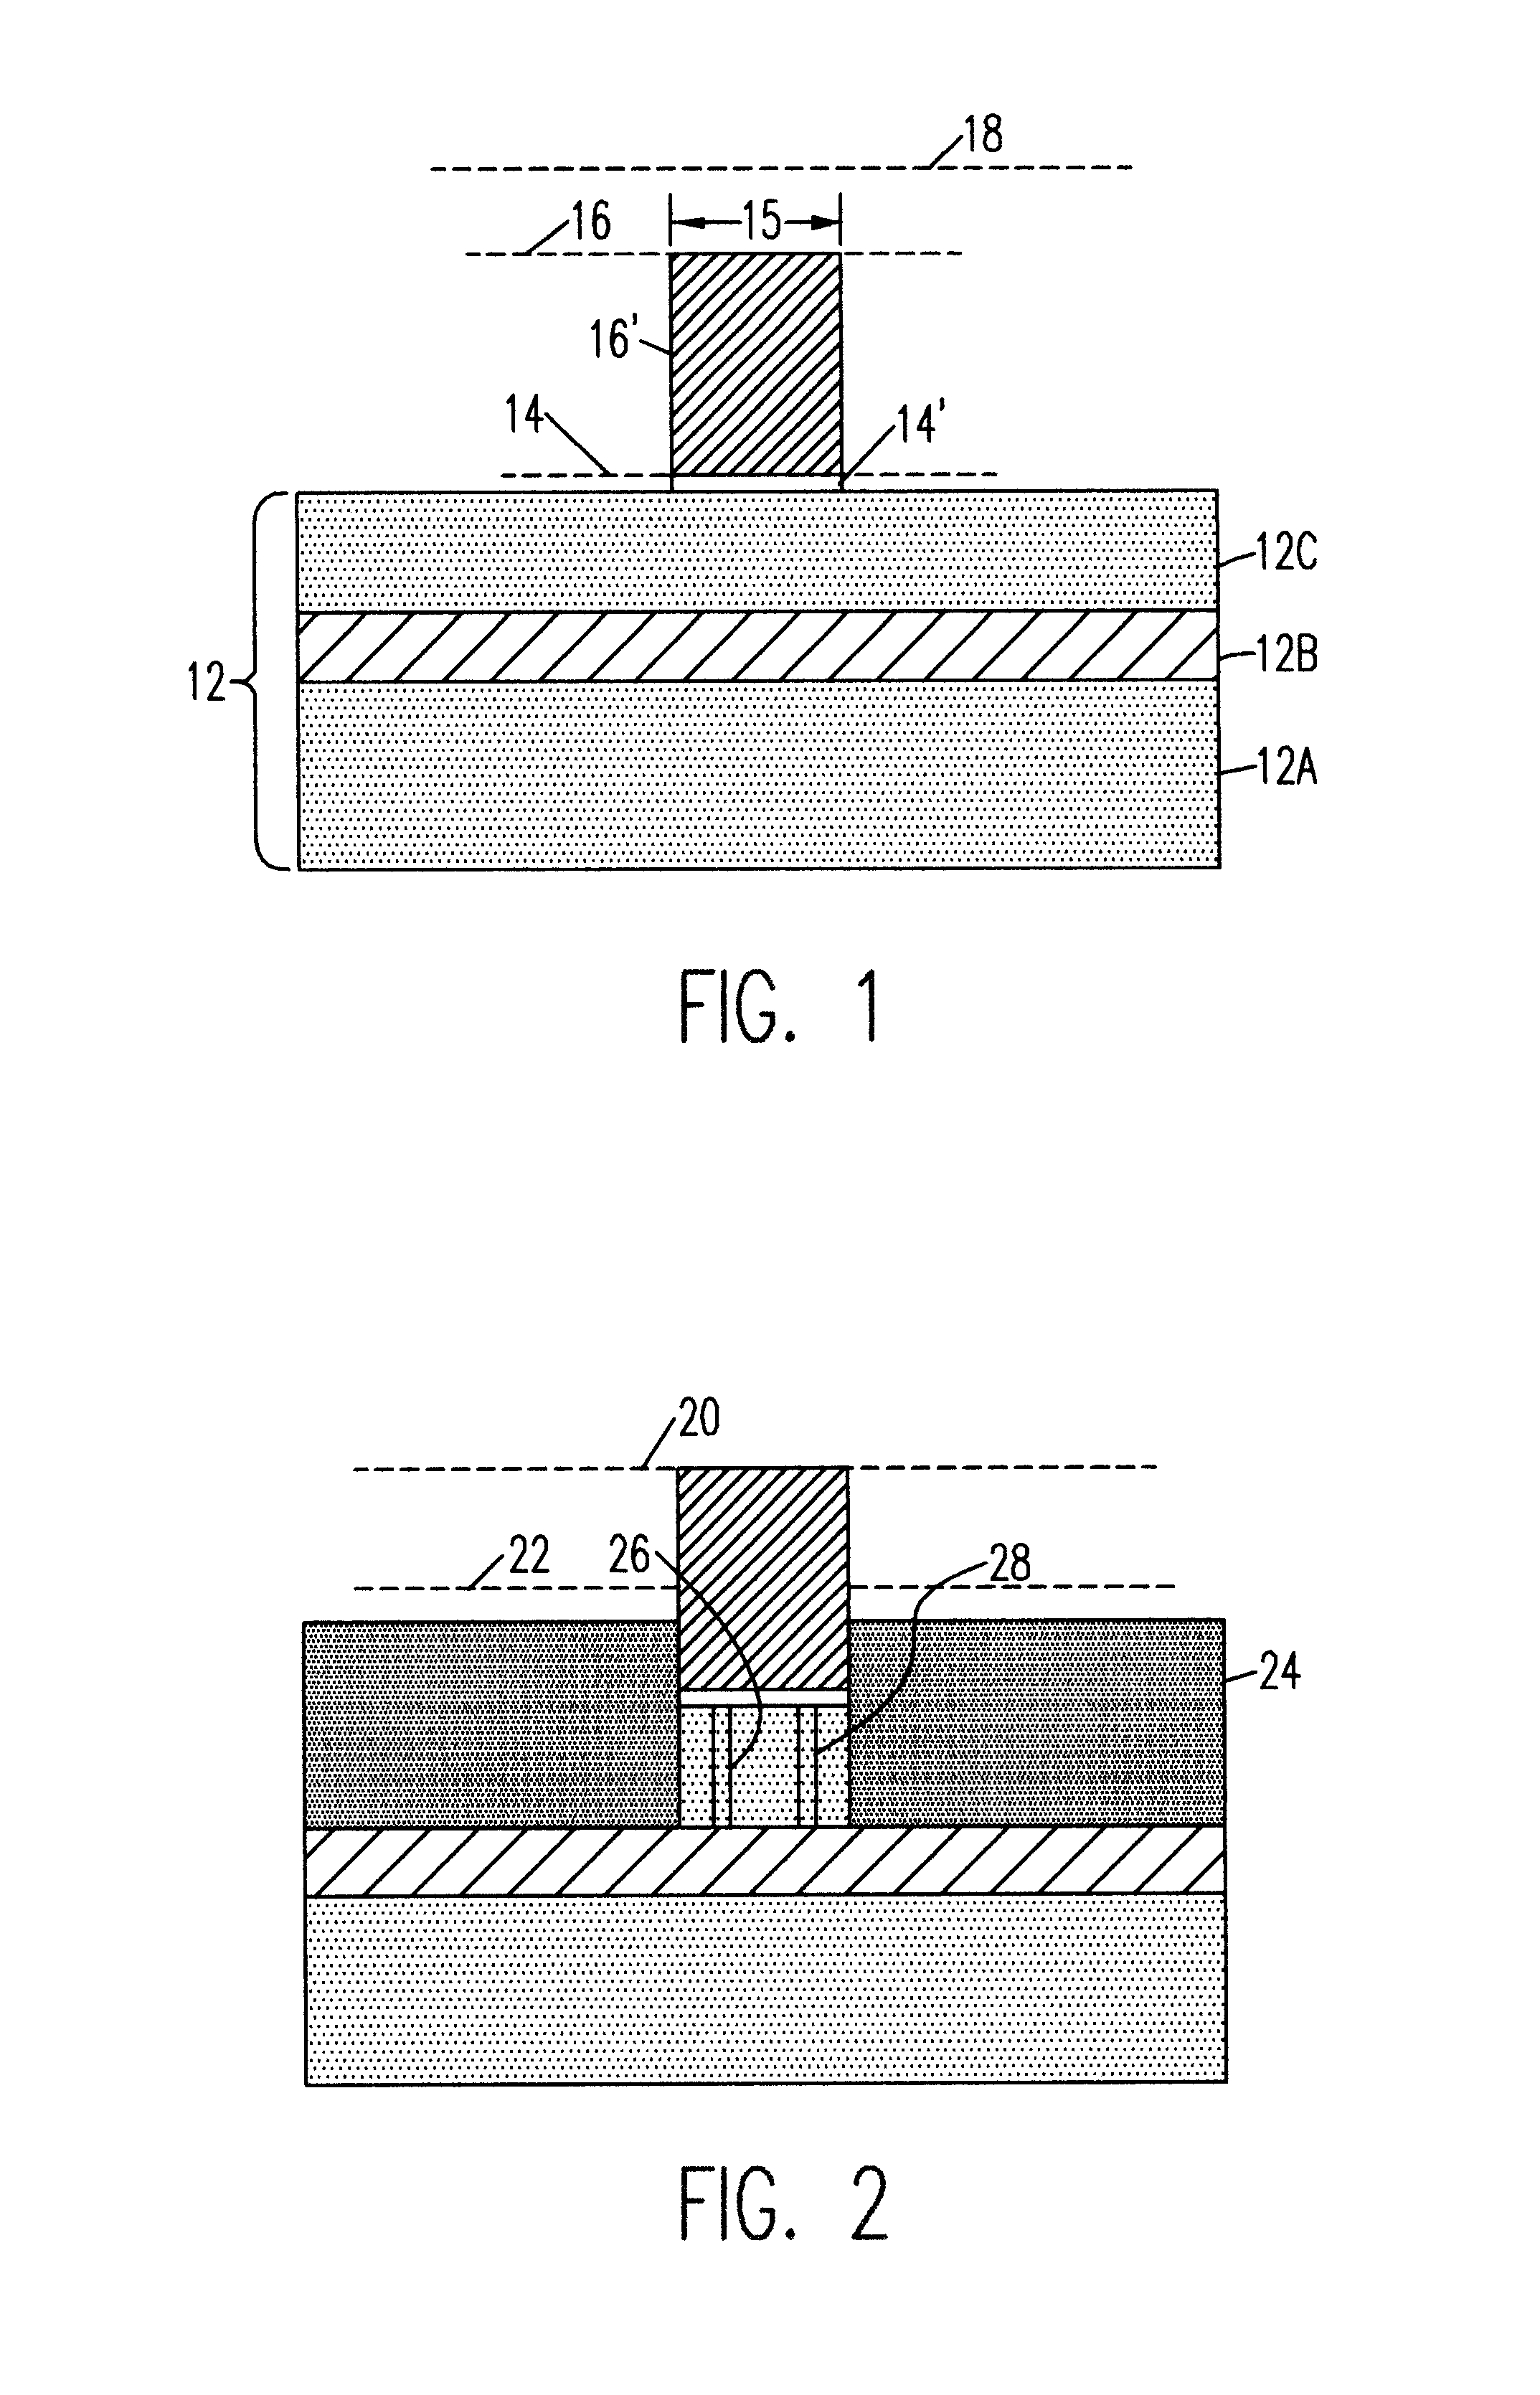 Polysilicon doped transistor using silicon-on-insulator and double silicon-on-insulator